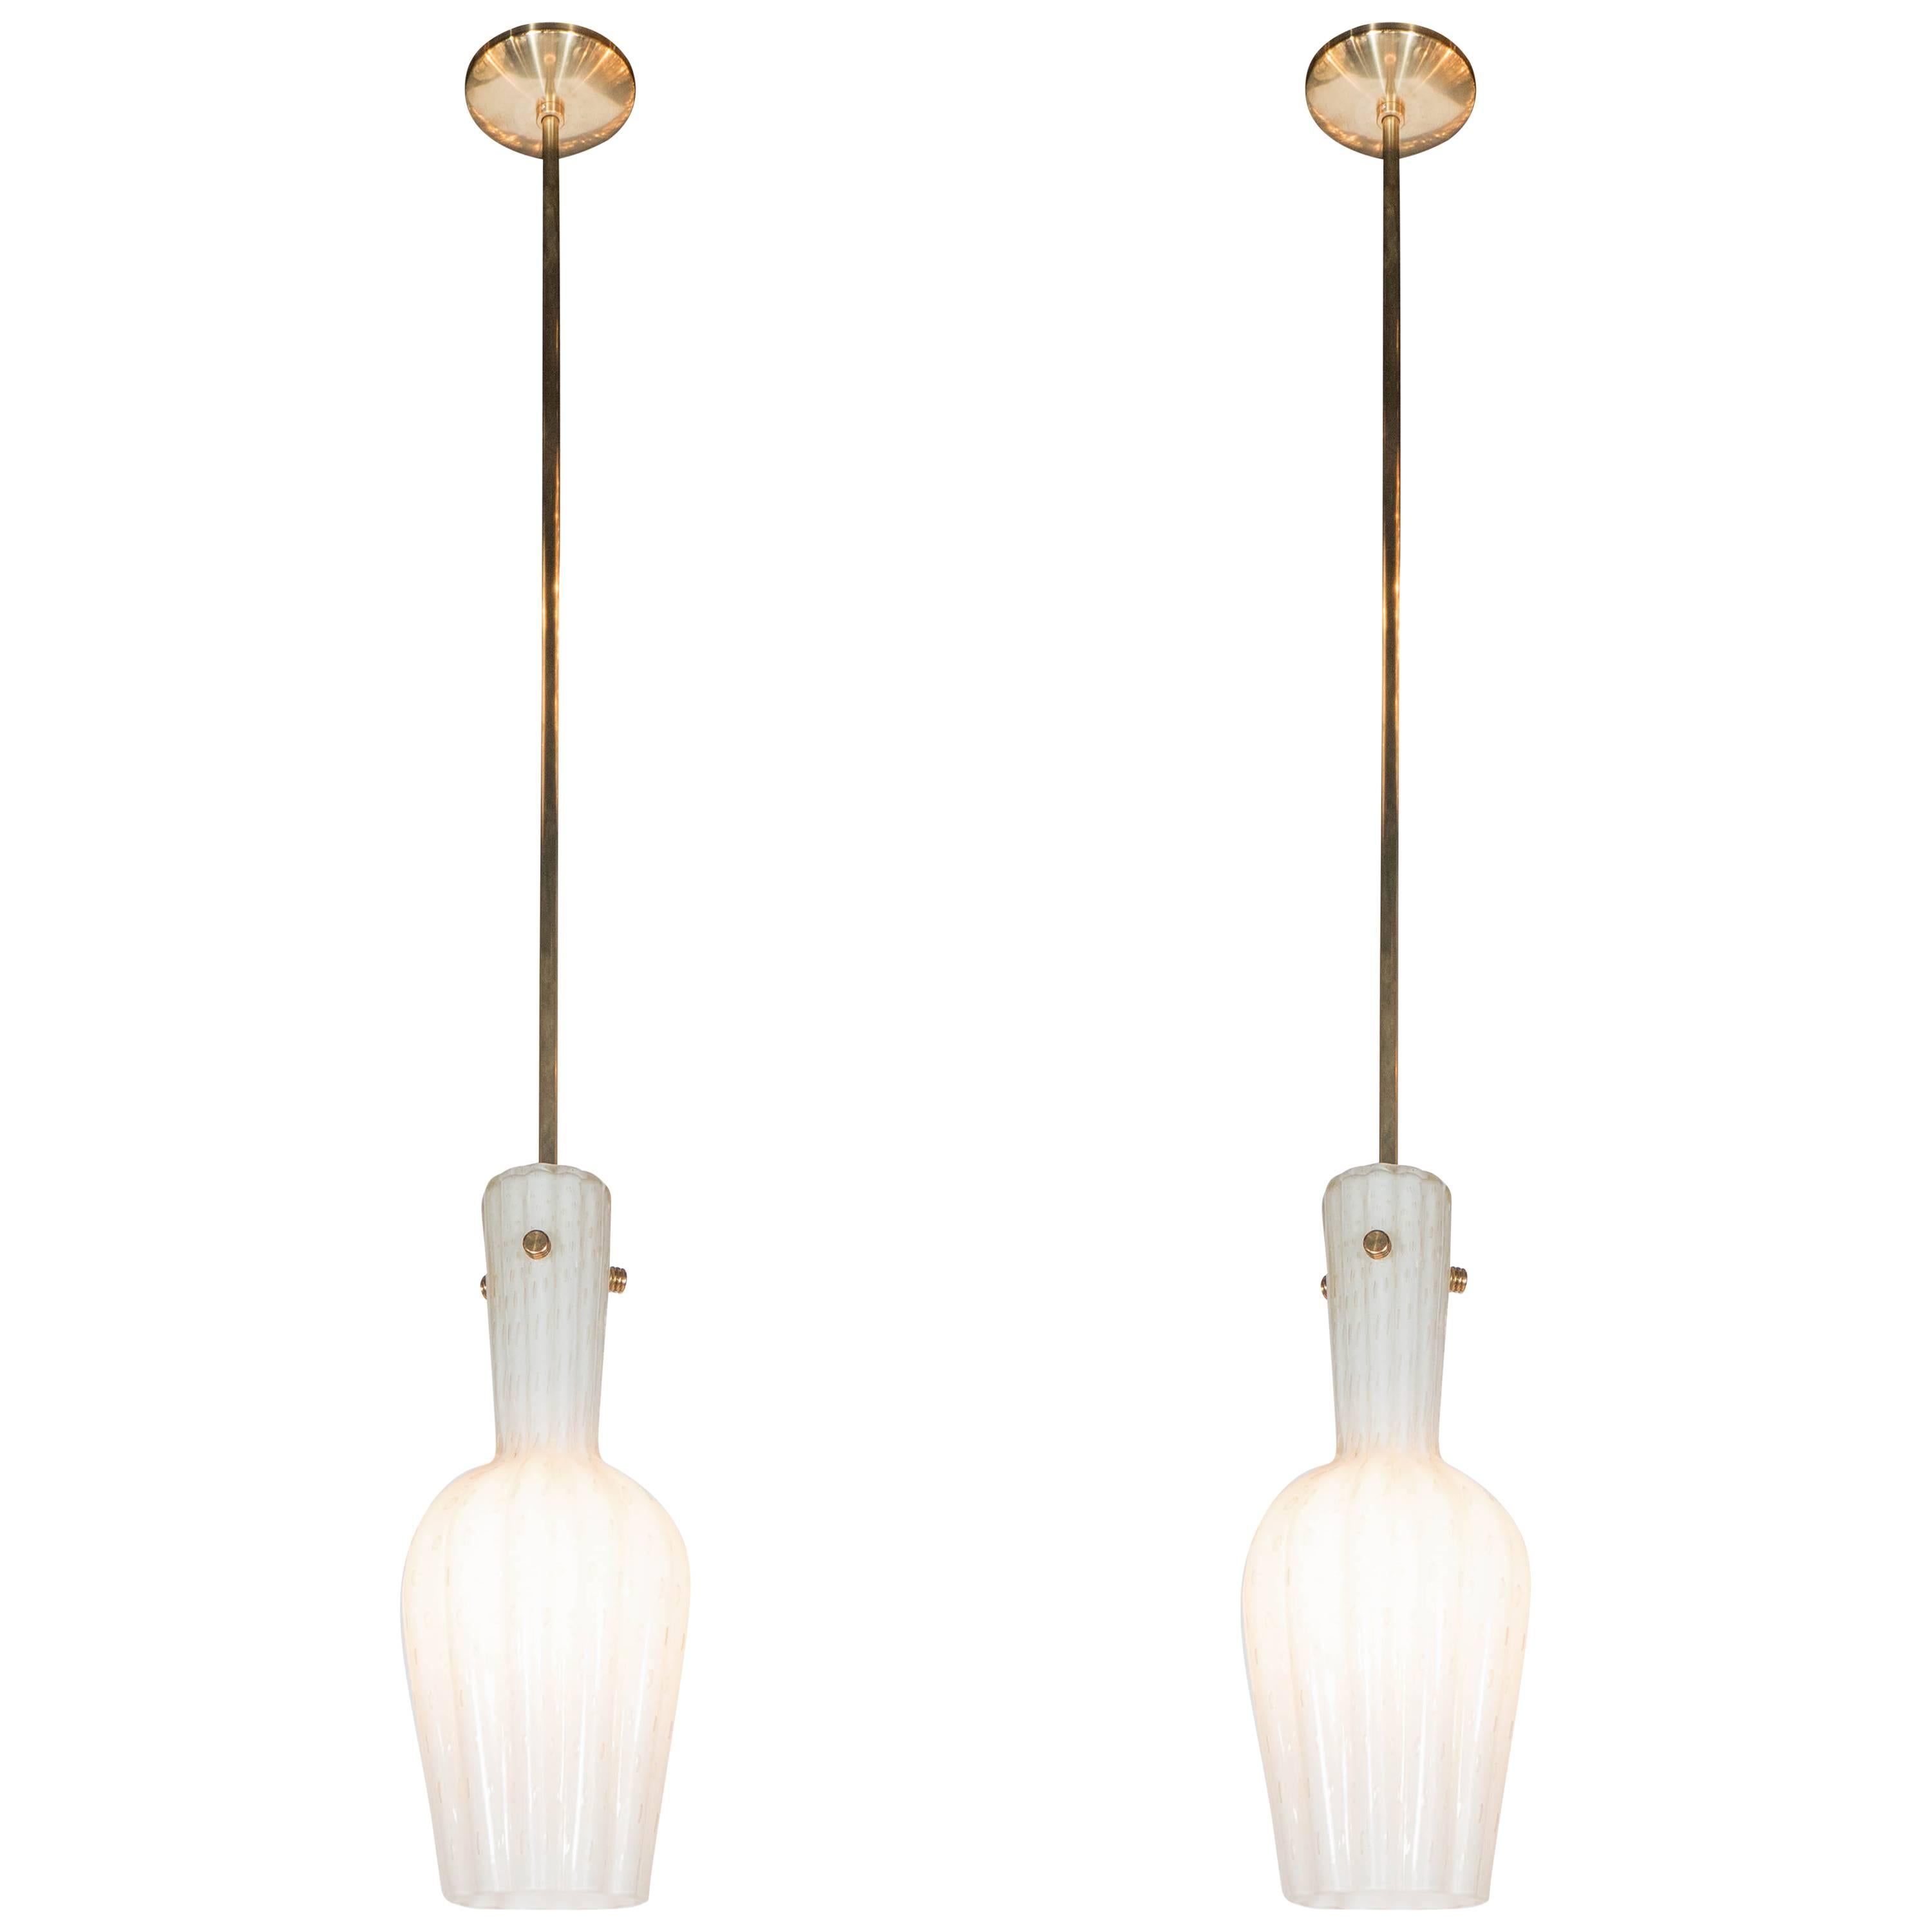 Pair of Fluted Urn-Form Murano White Glass Pendants with Antiqued Brass Fittings